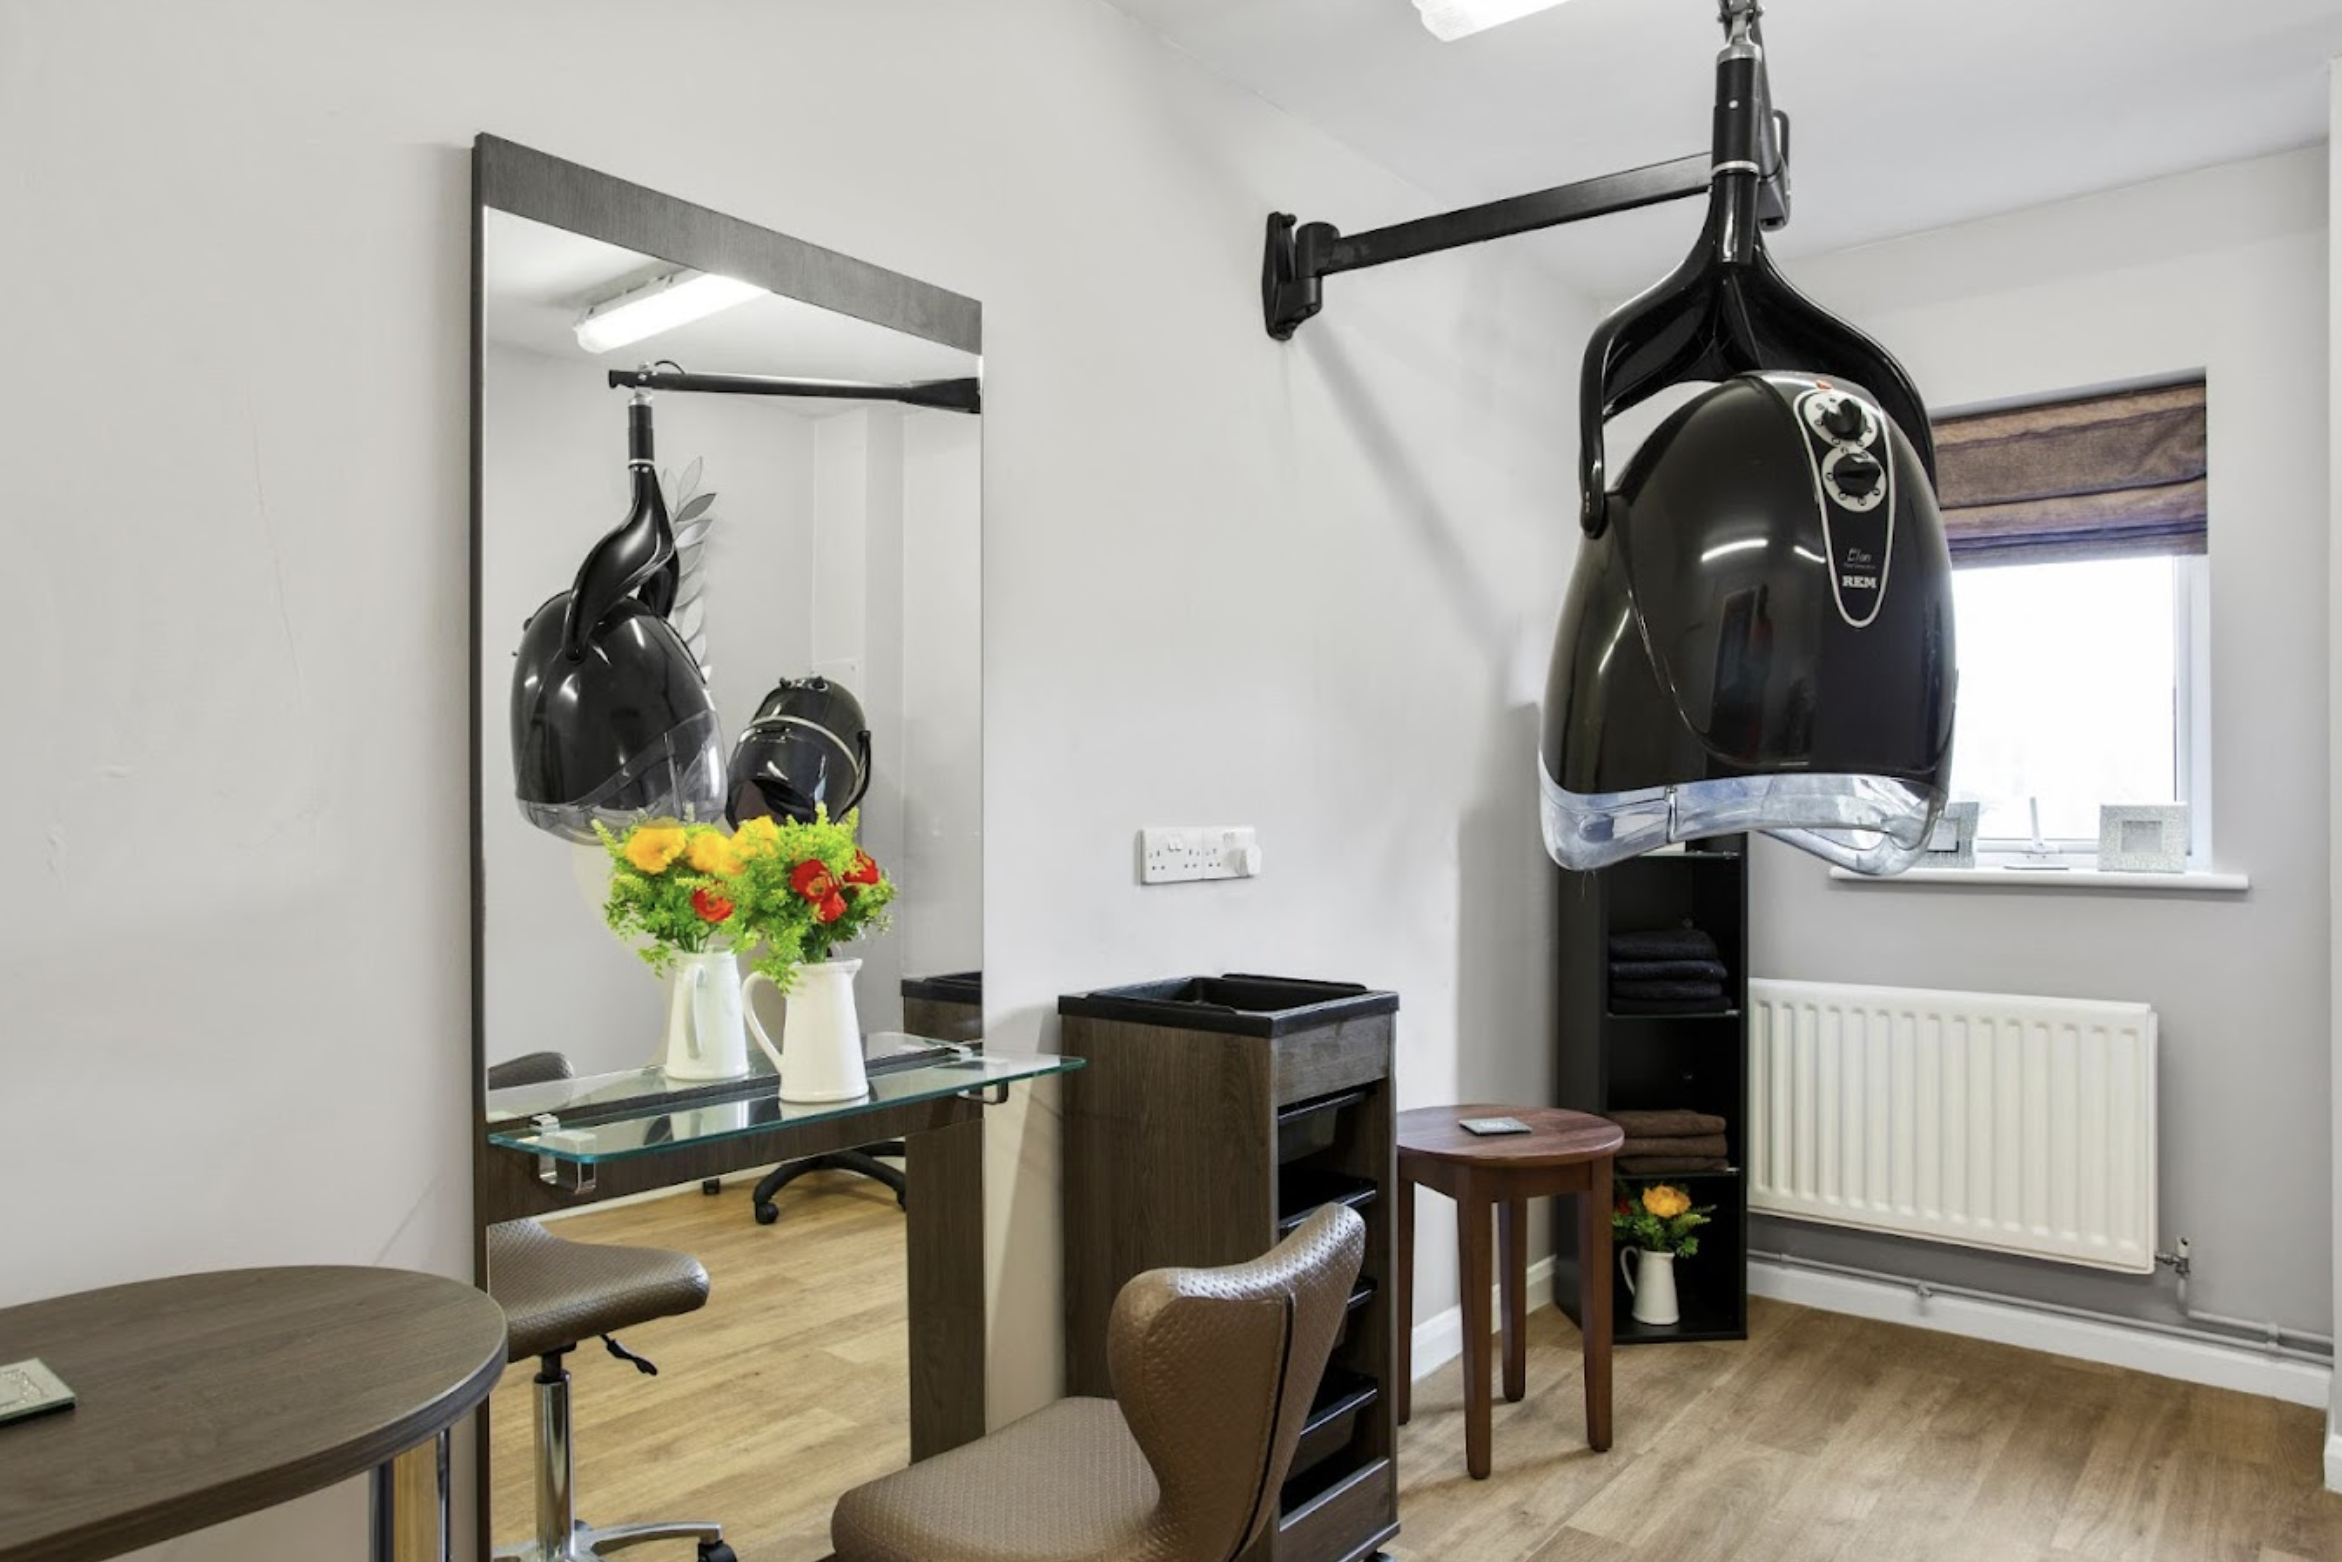 Salon of Wombell Hall care home in Northfleet, Gravesend